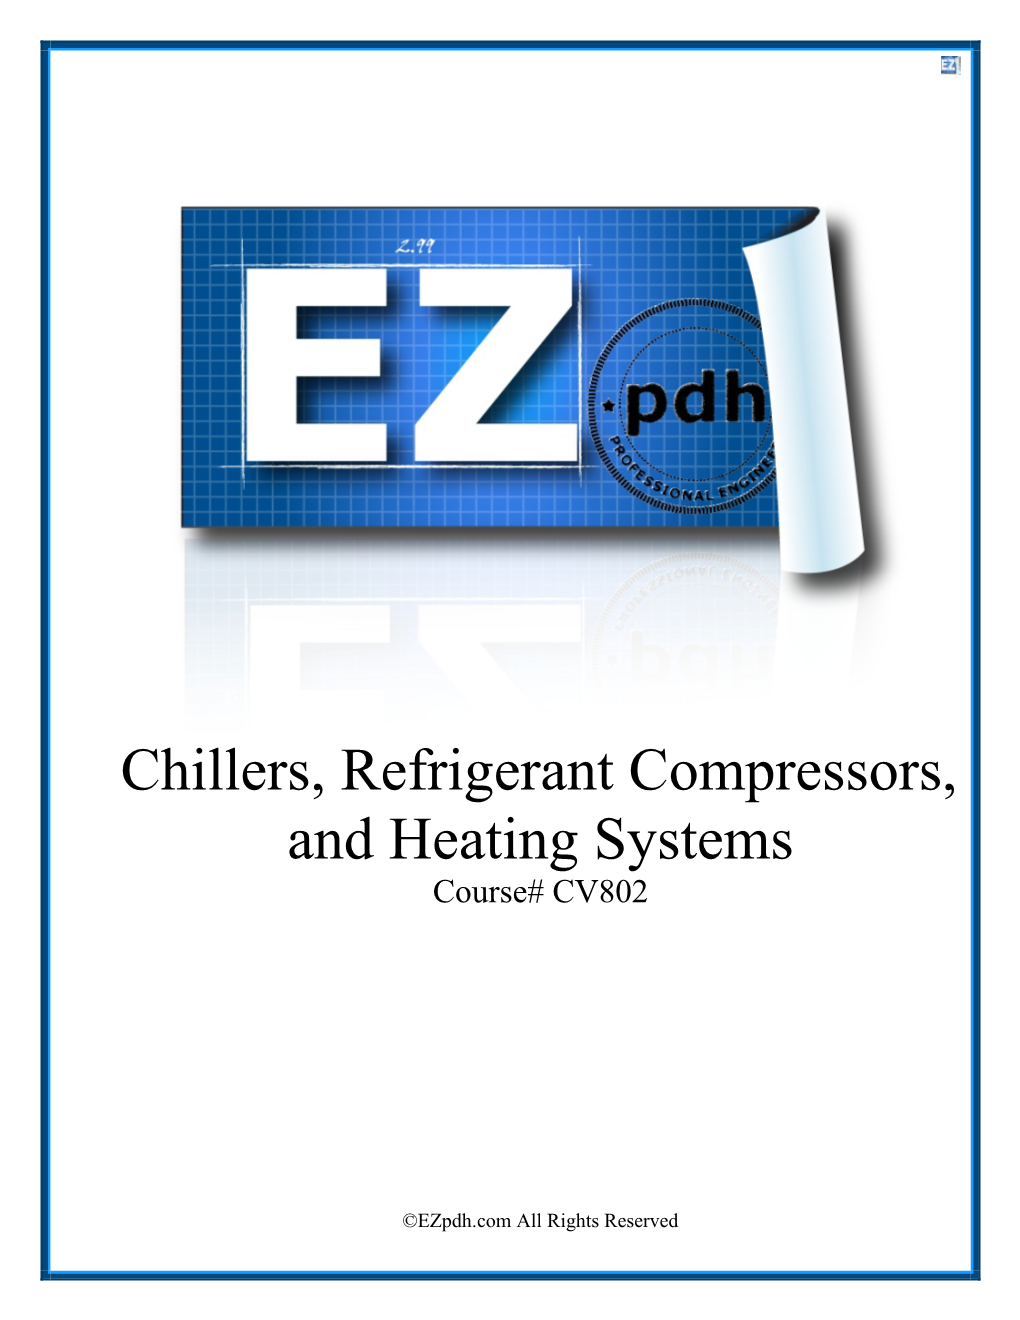 Chillers, Refrigerant Compressors, and Heating Systems Course# CV802